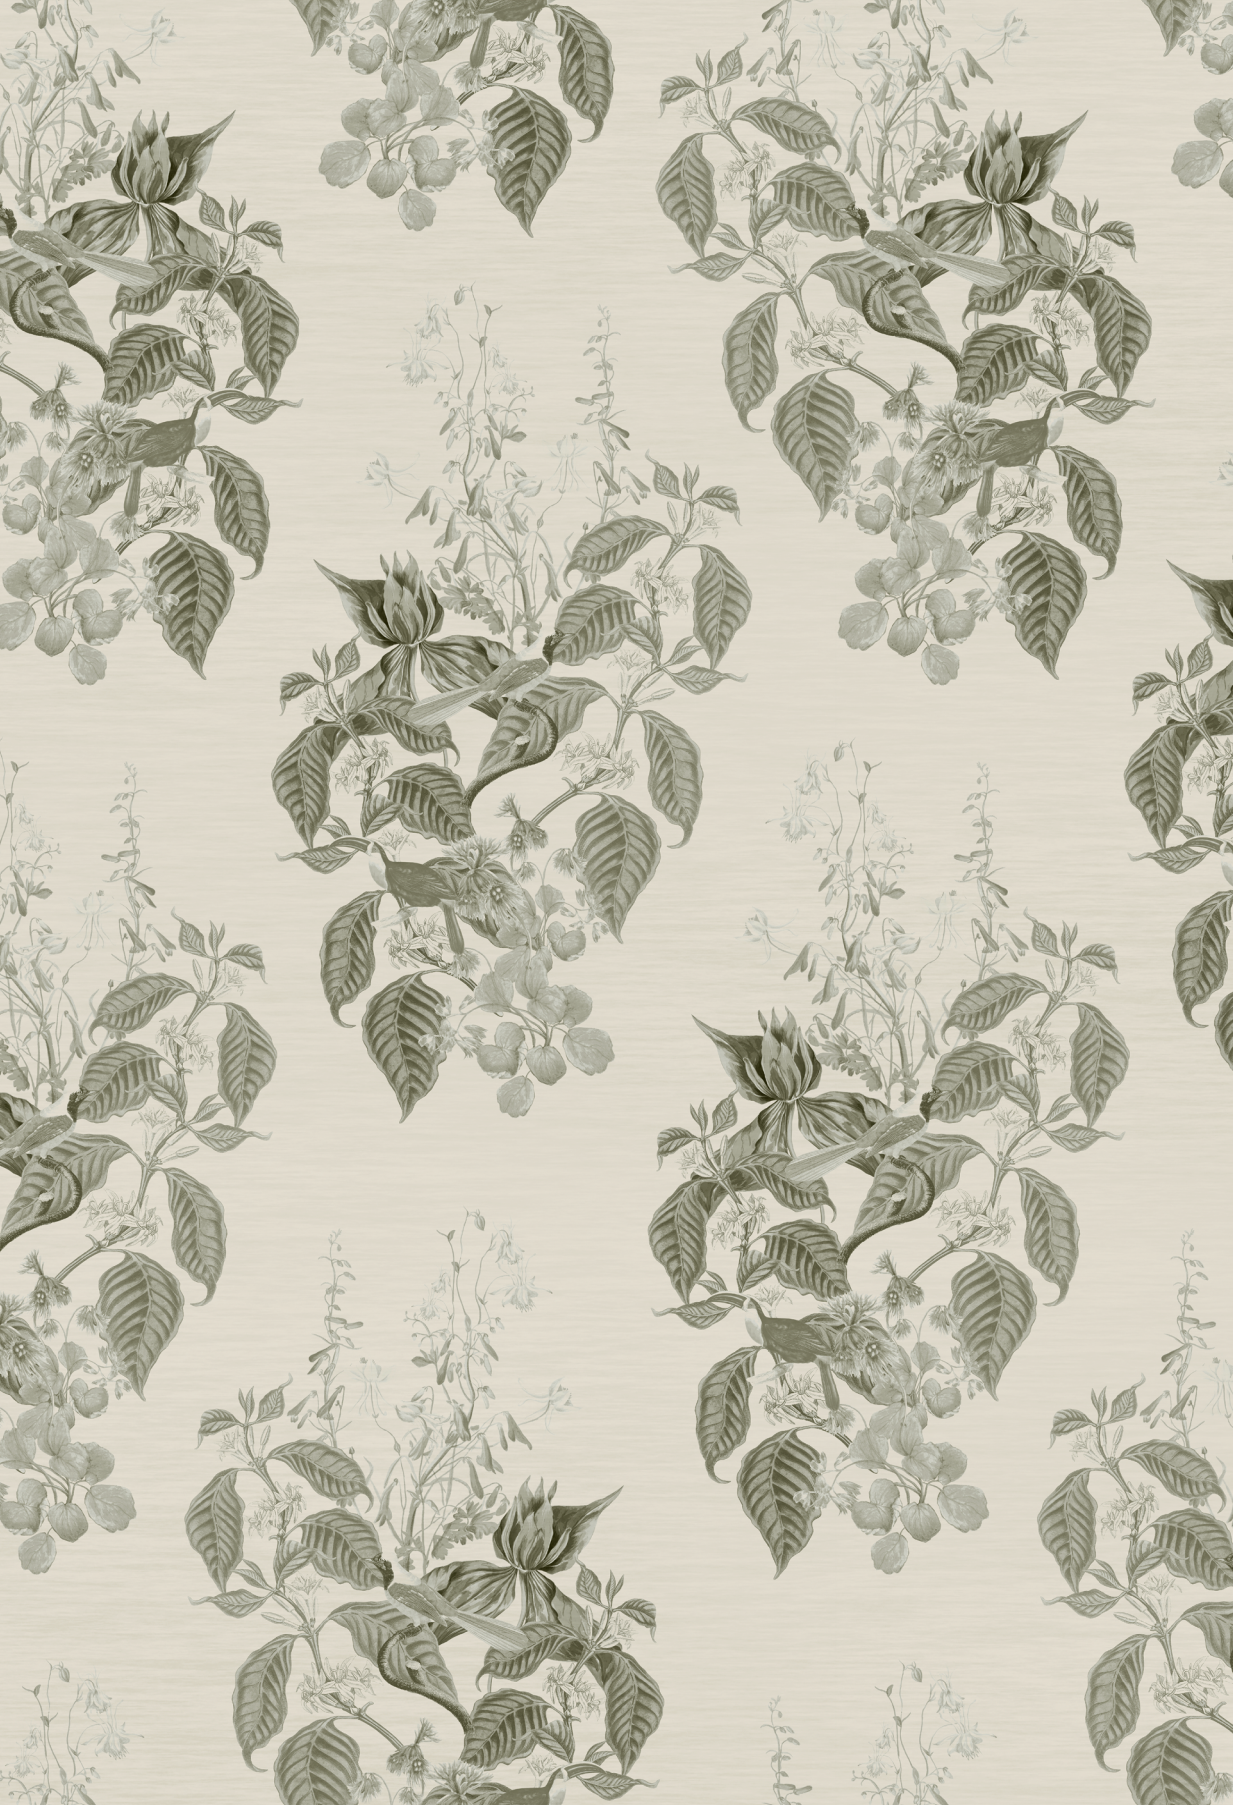 Grey aviary Isle wallpaper with a bird and floral pattern in French Gray by Deus ex Gardenia.